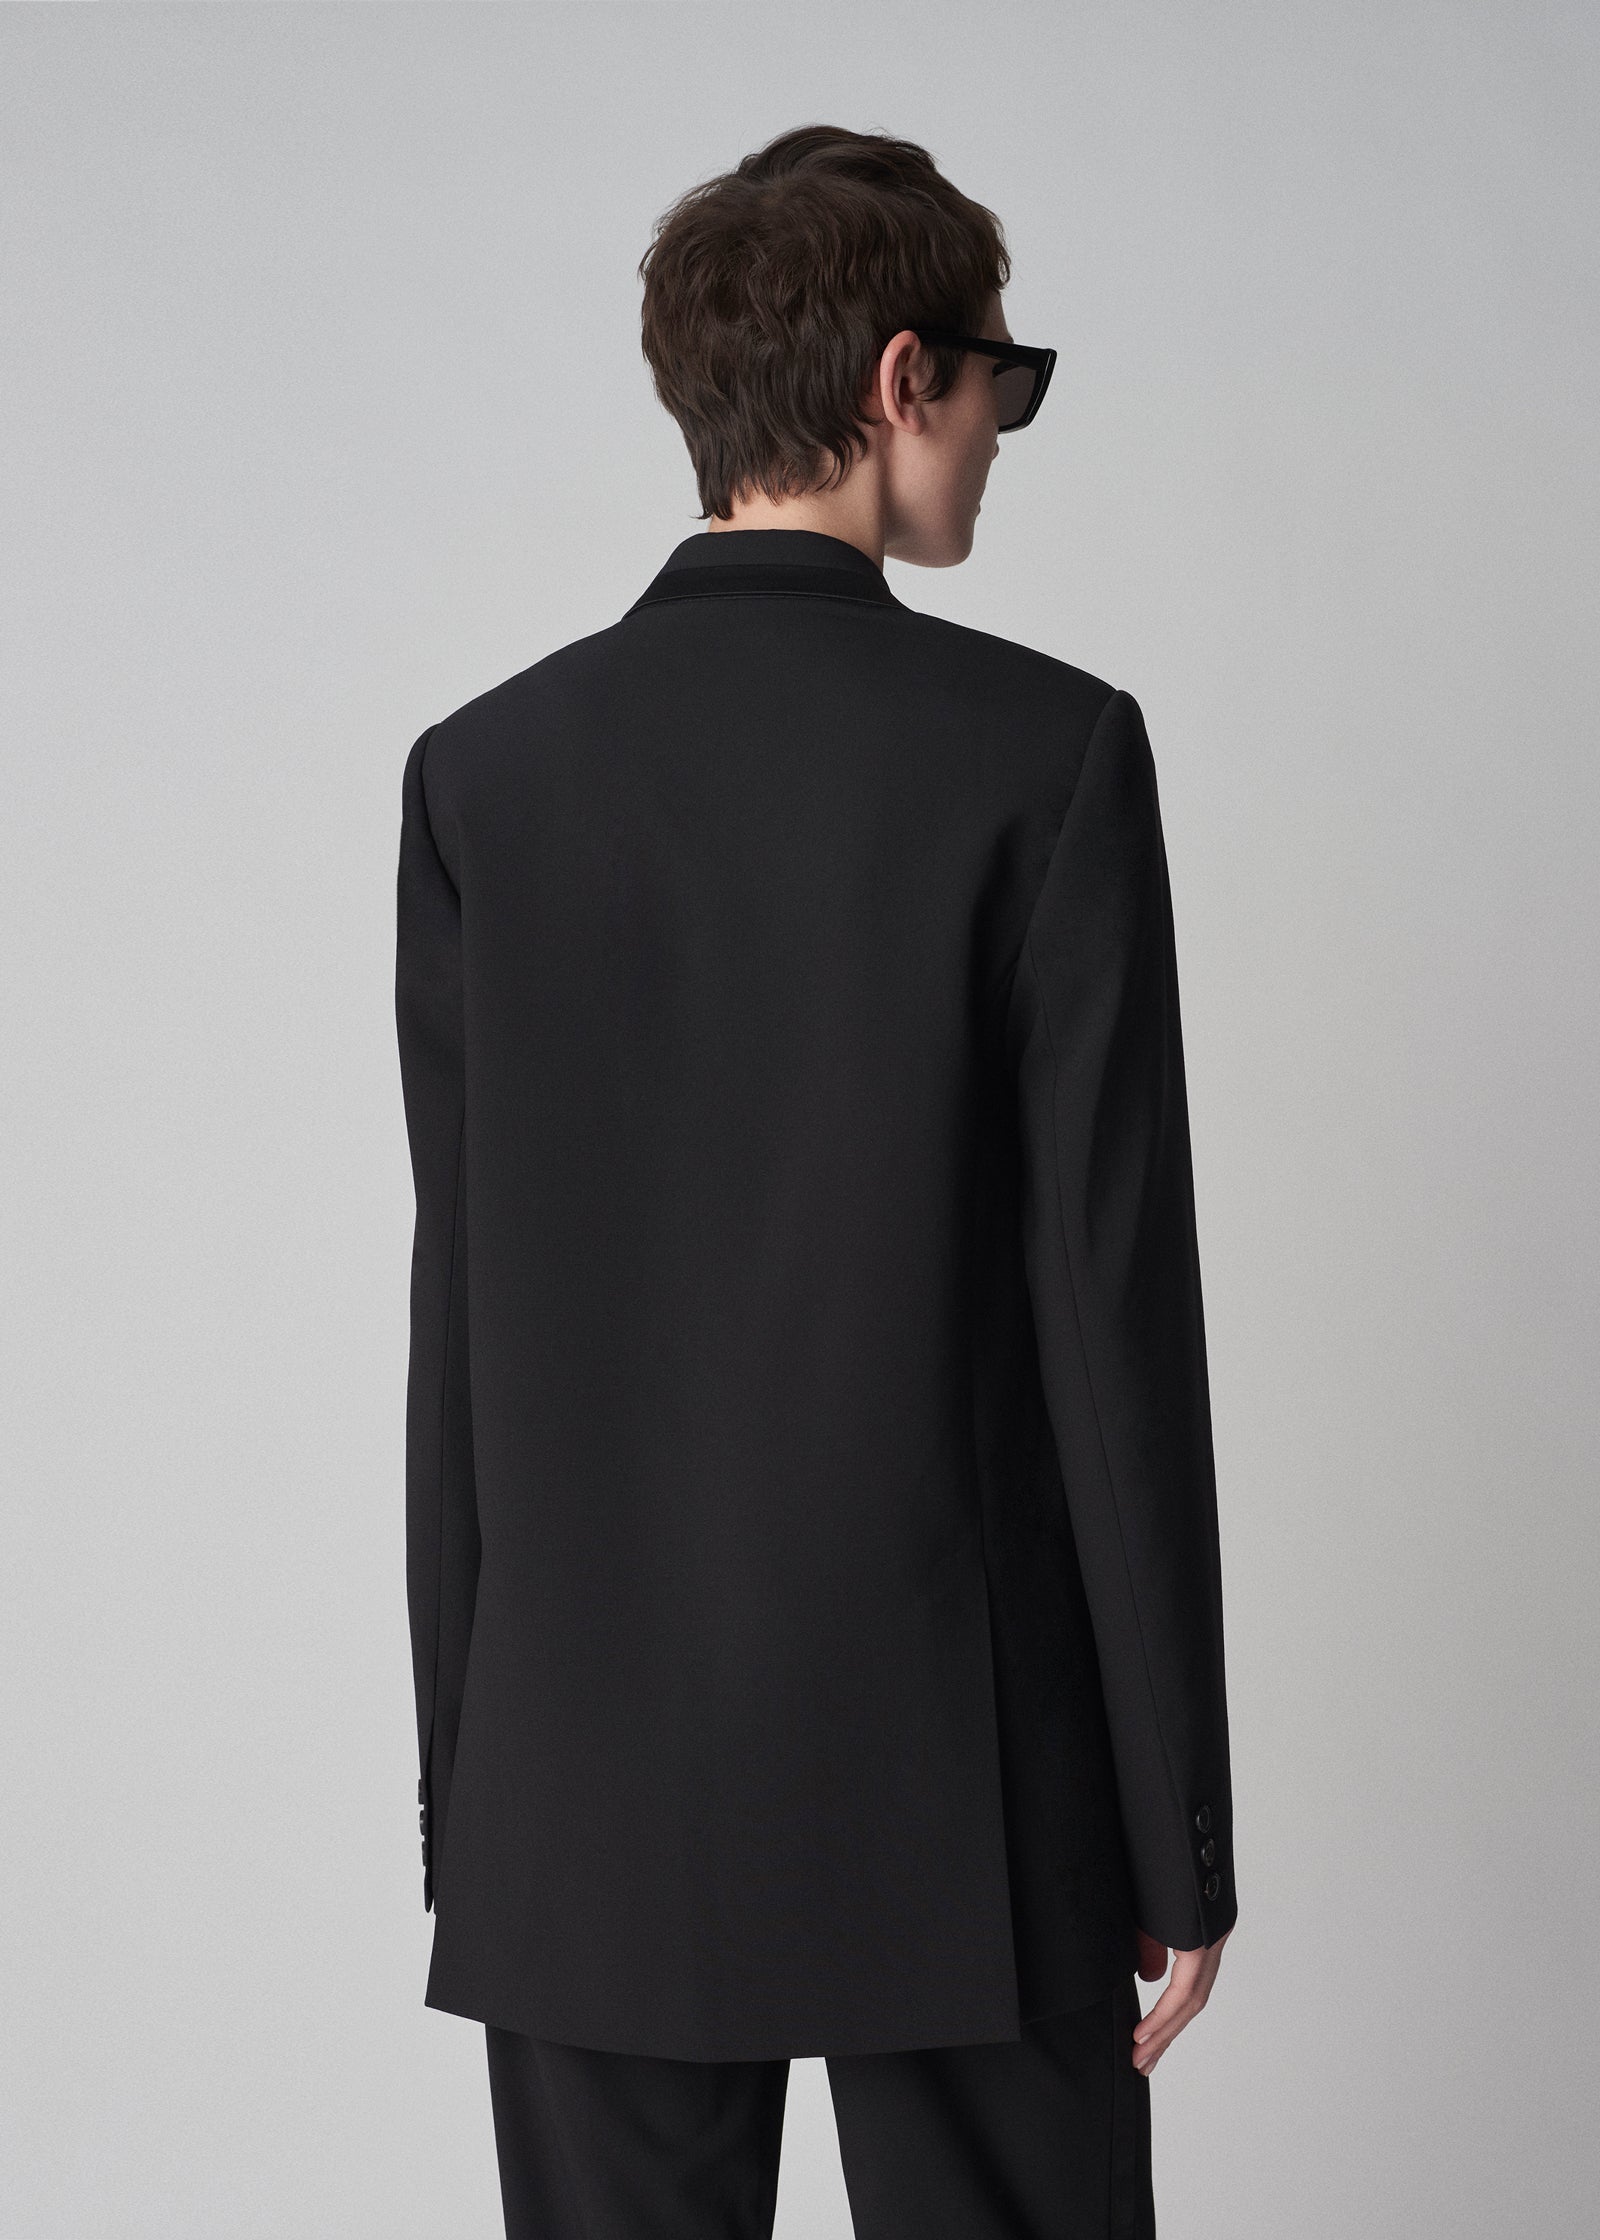 Tuxedo Jacket in Wool and Silk - Black - CO Collections